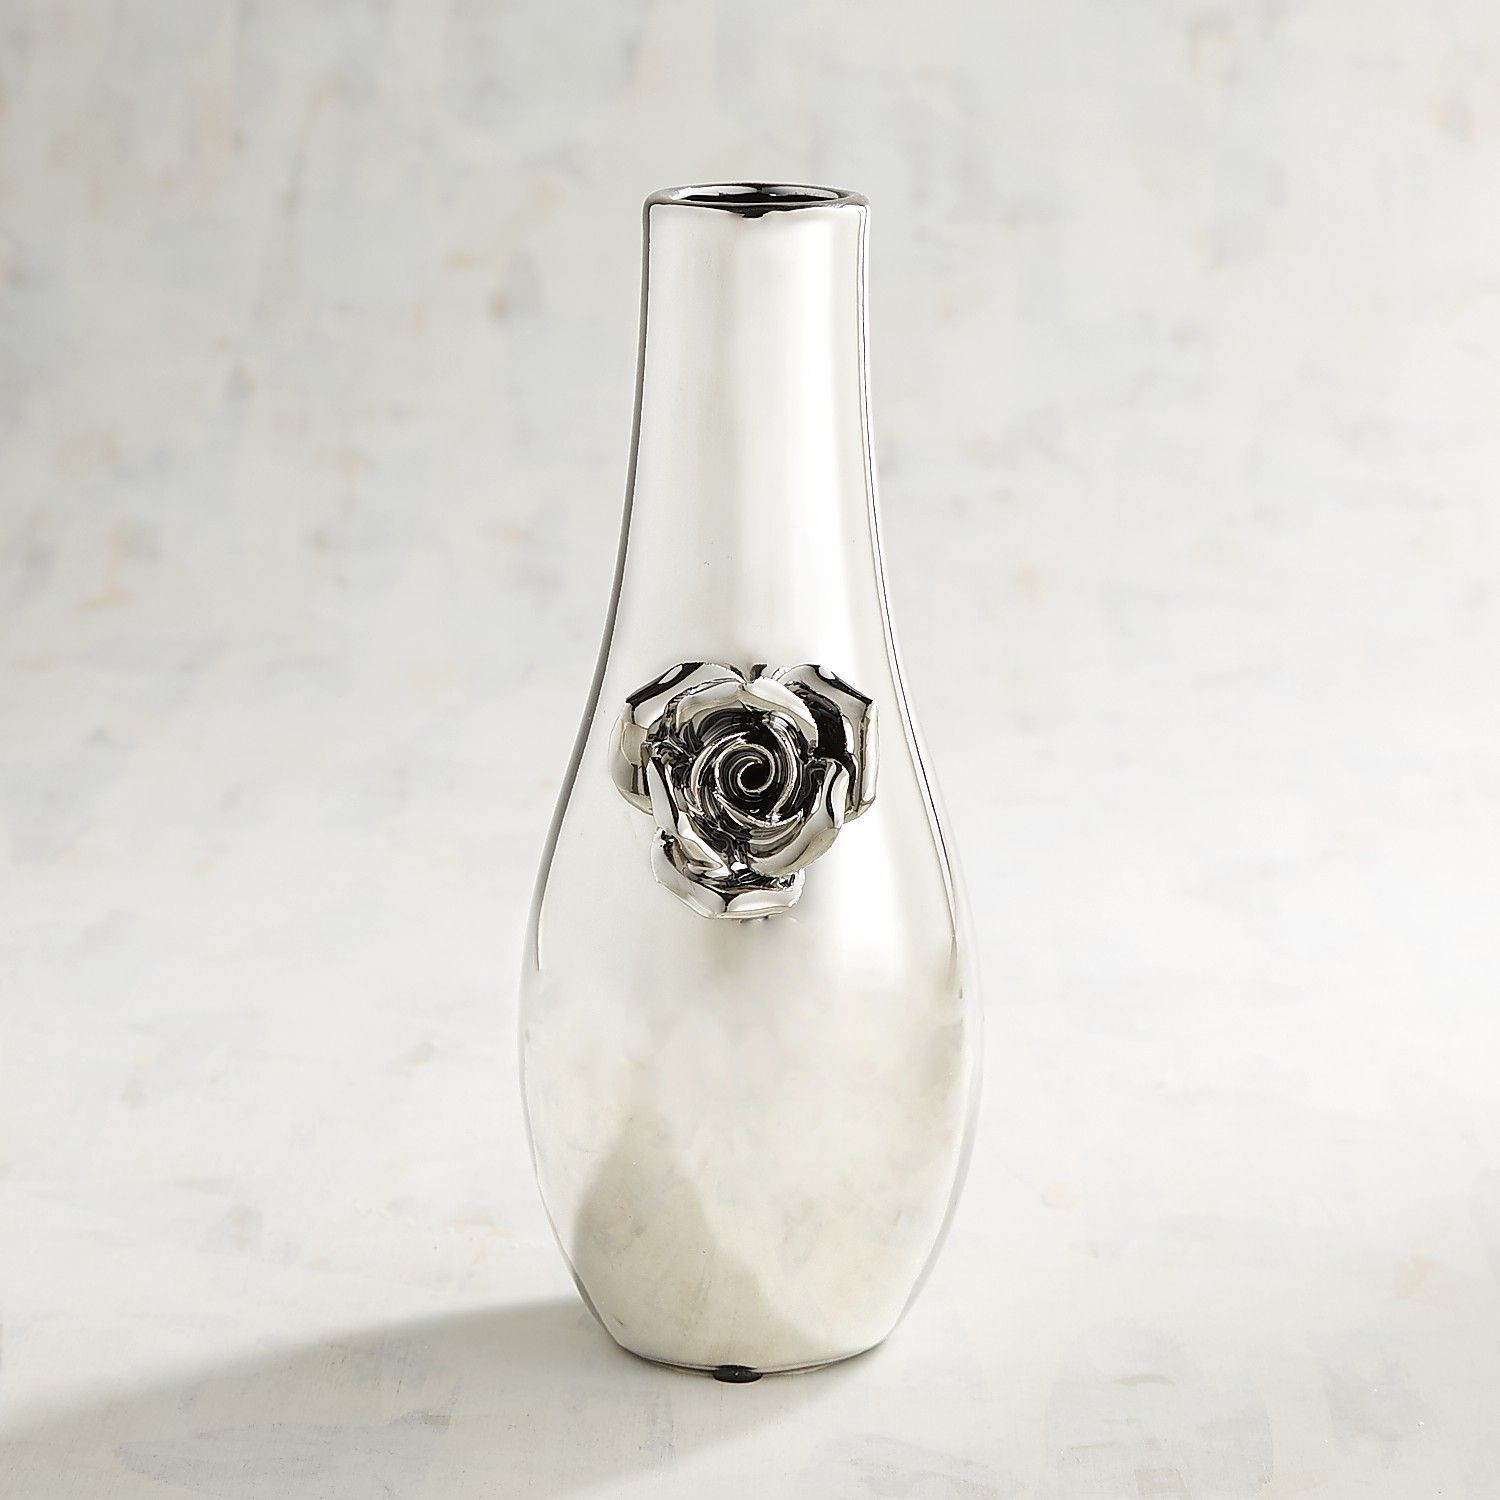 28 Awesome Tiffany Bud Vase 2024 free download tiffany bud vase of silver bud vase pictures silver bud vase with flower pinterest within silver bud vase pictures silver bud vase with flower pinterest